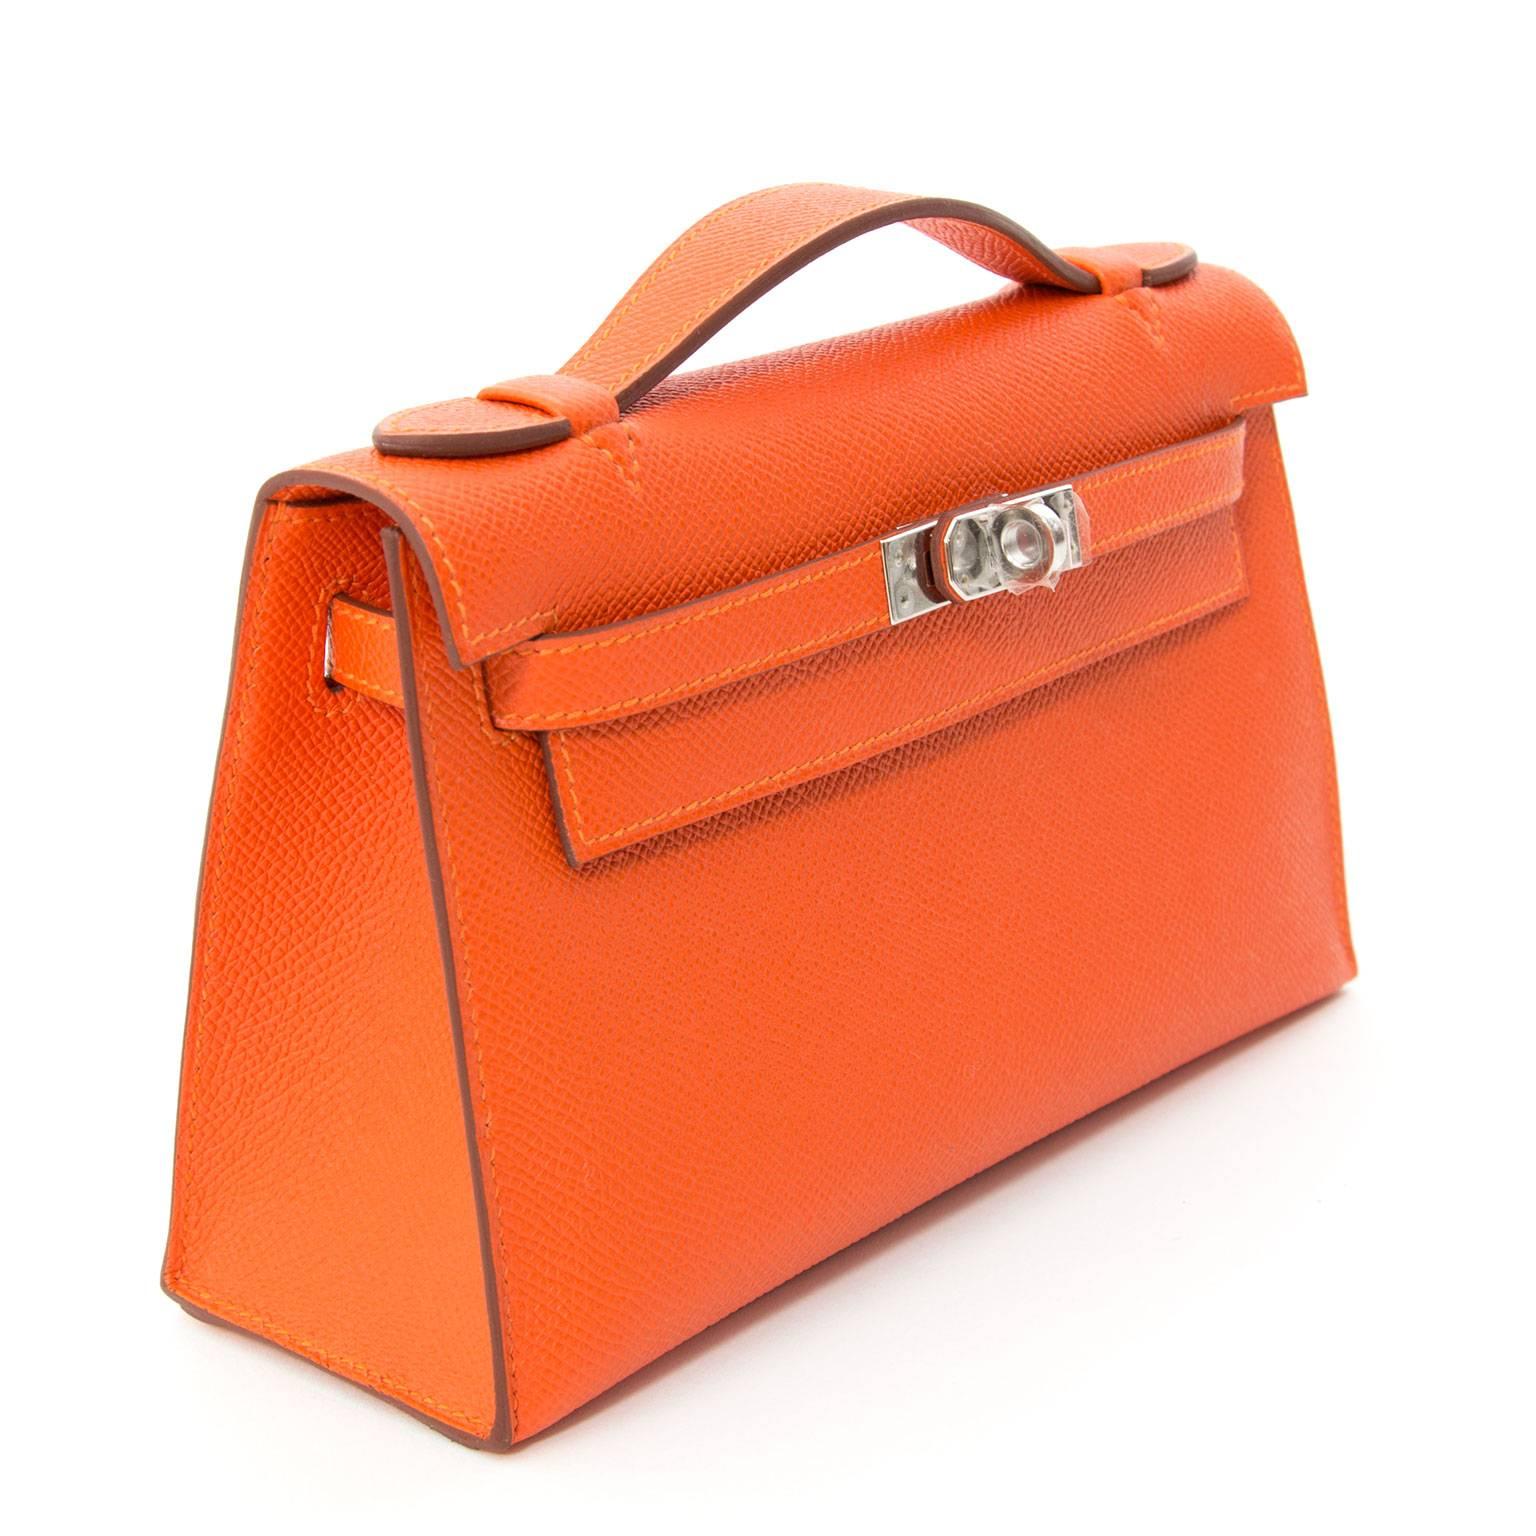 Charming Hermès Kelly top handle clutch. This miniature Kelly pochette is made from durable Epsom leather. The perfect material for a bag to keep its structure. 
The paladium hardware looks modern on this new Hermès color 'Feu' a very vibrant,